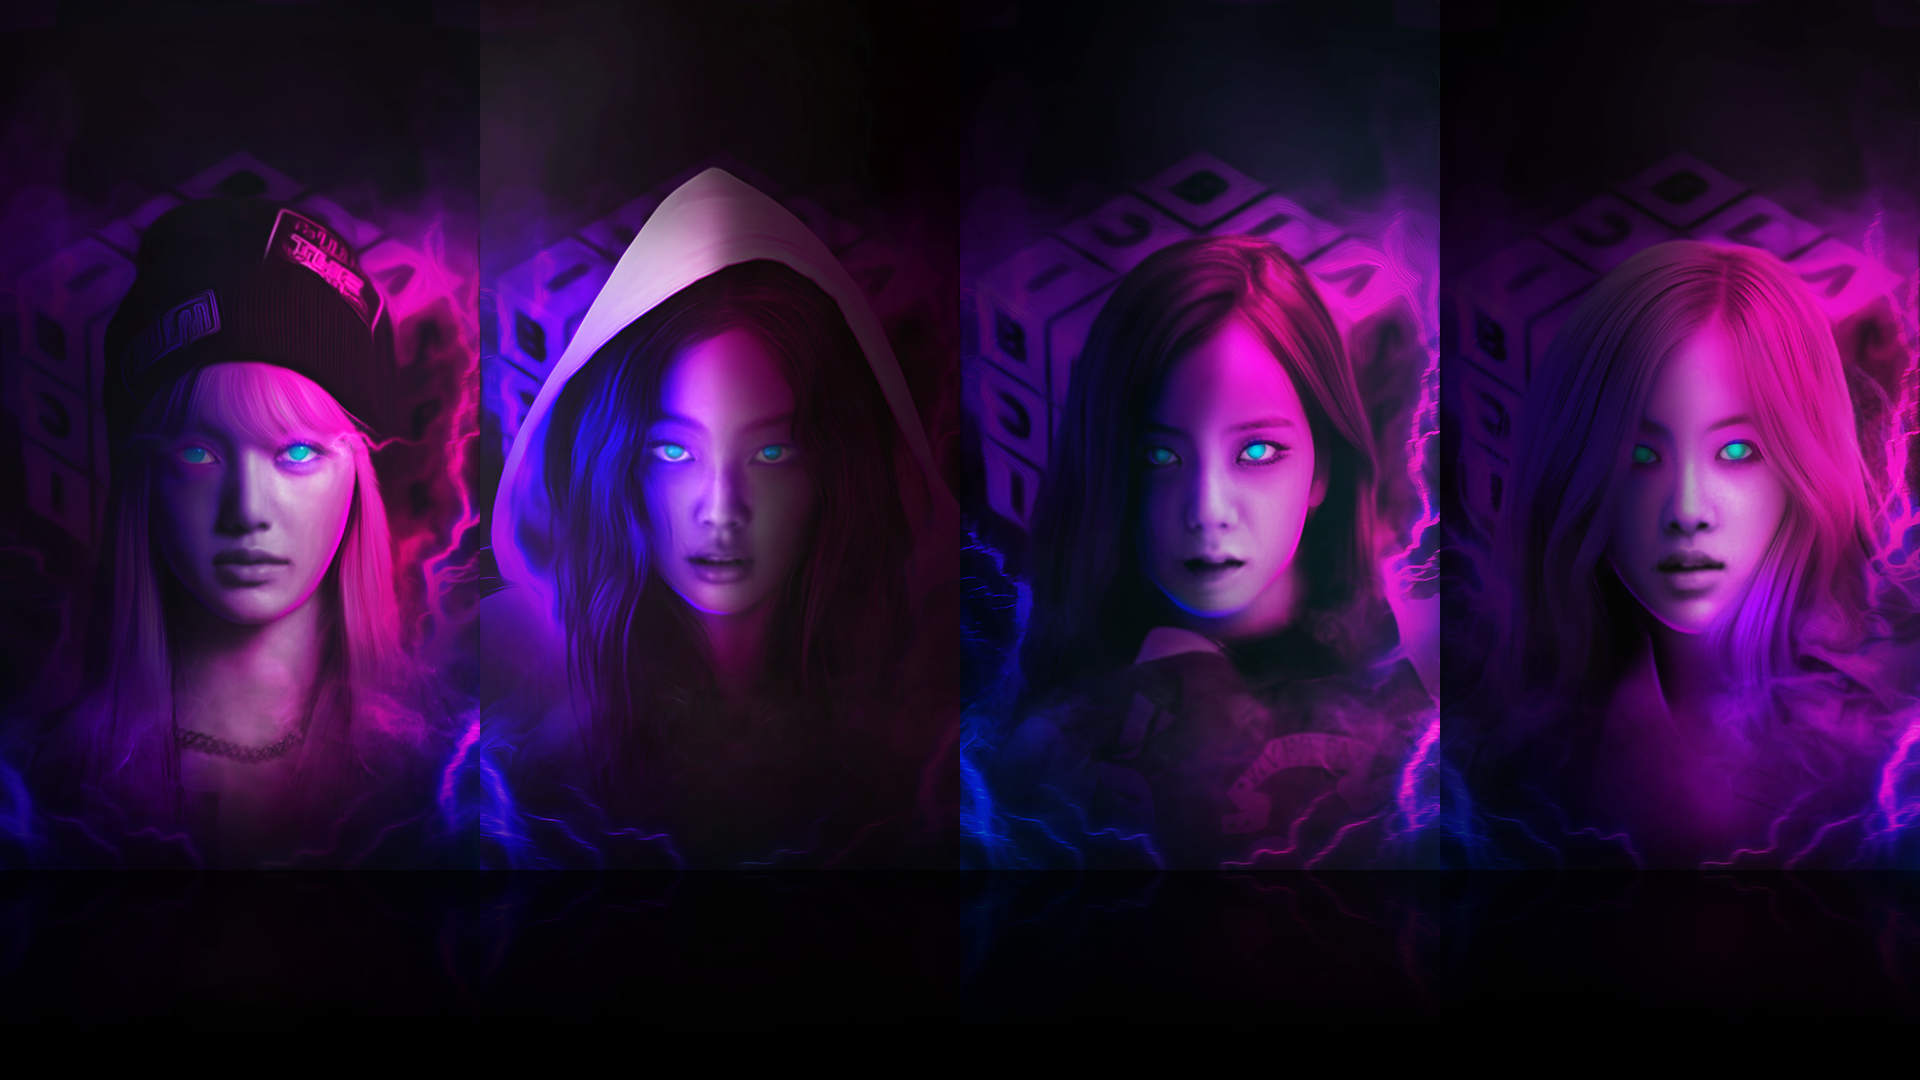 BLACKPINK WALLPAPER 1920x1080 HD [ NEON ] by ExoticGeneration21 on